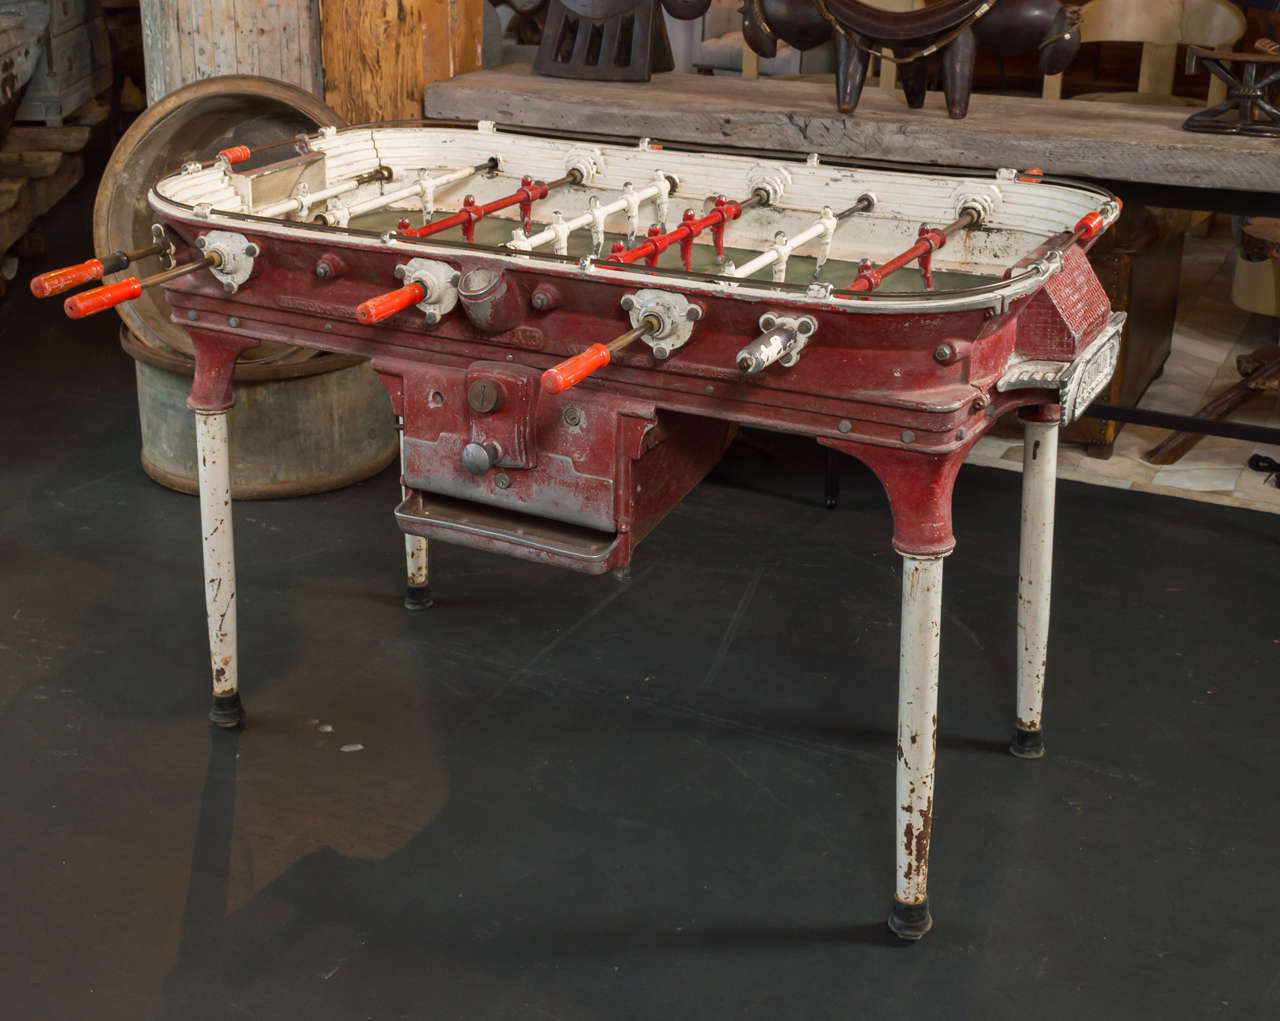 Estadio Foosball Deco Table, circa 1920s-1930”s.  Model A13.  An amazing survivor from an Argentinian company.  Working foosball table made from cast aluminum, with original paint.